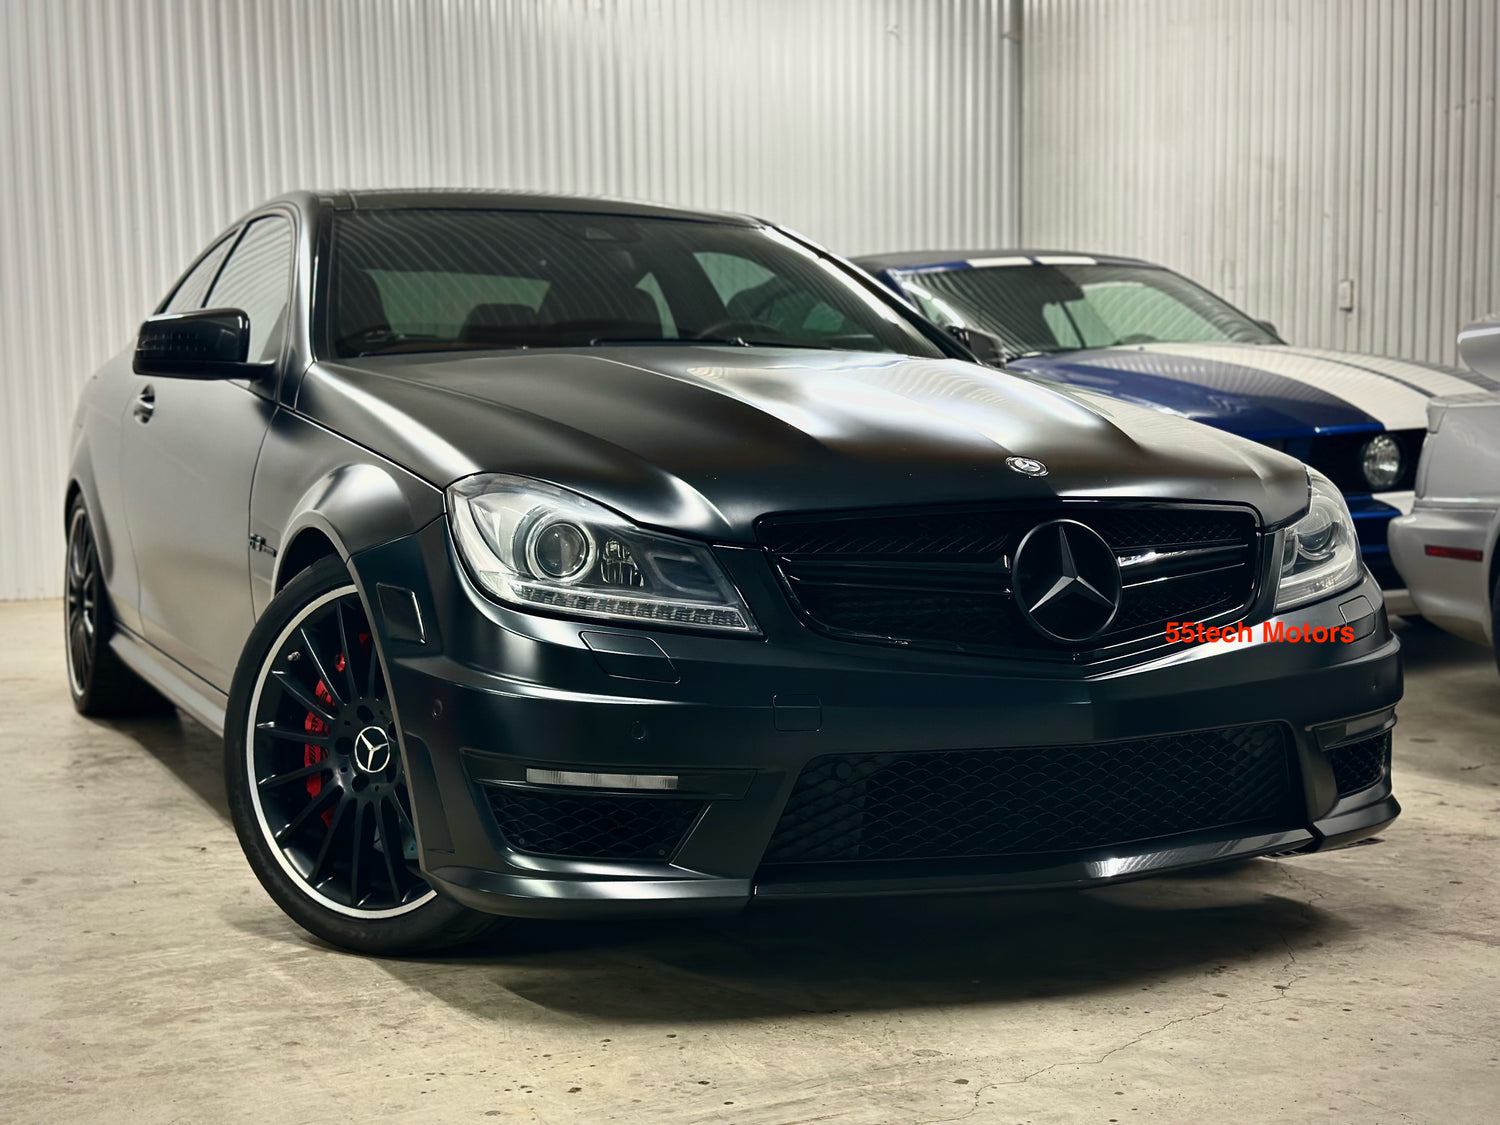 Mercedes C63 AMG 2013 2014 front grille black glossy